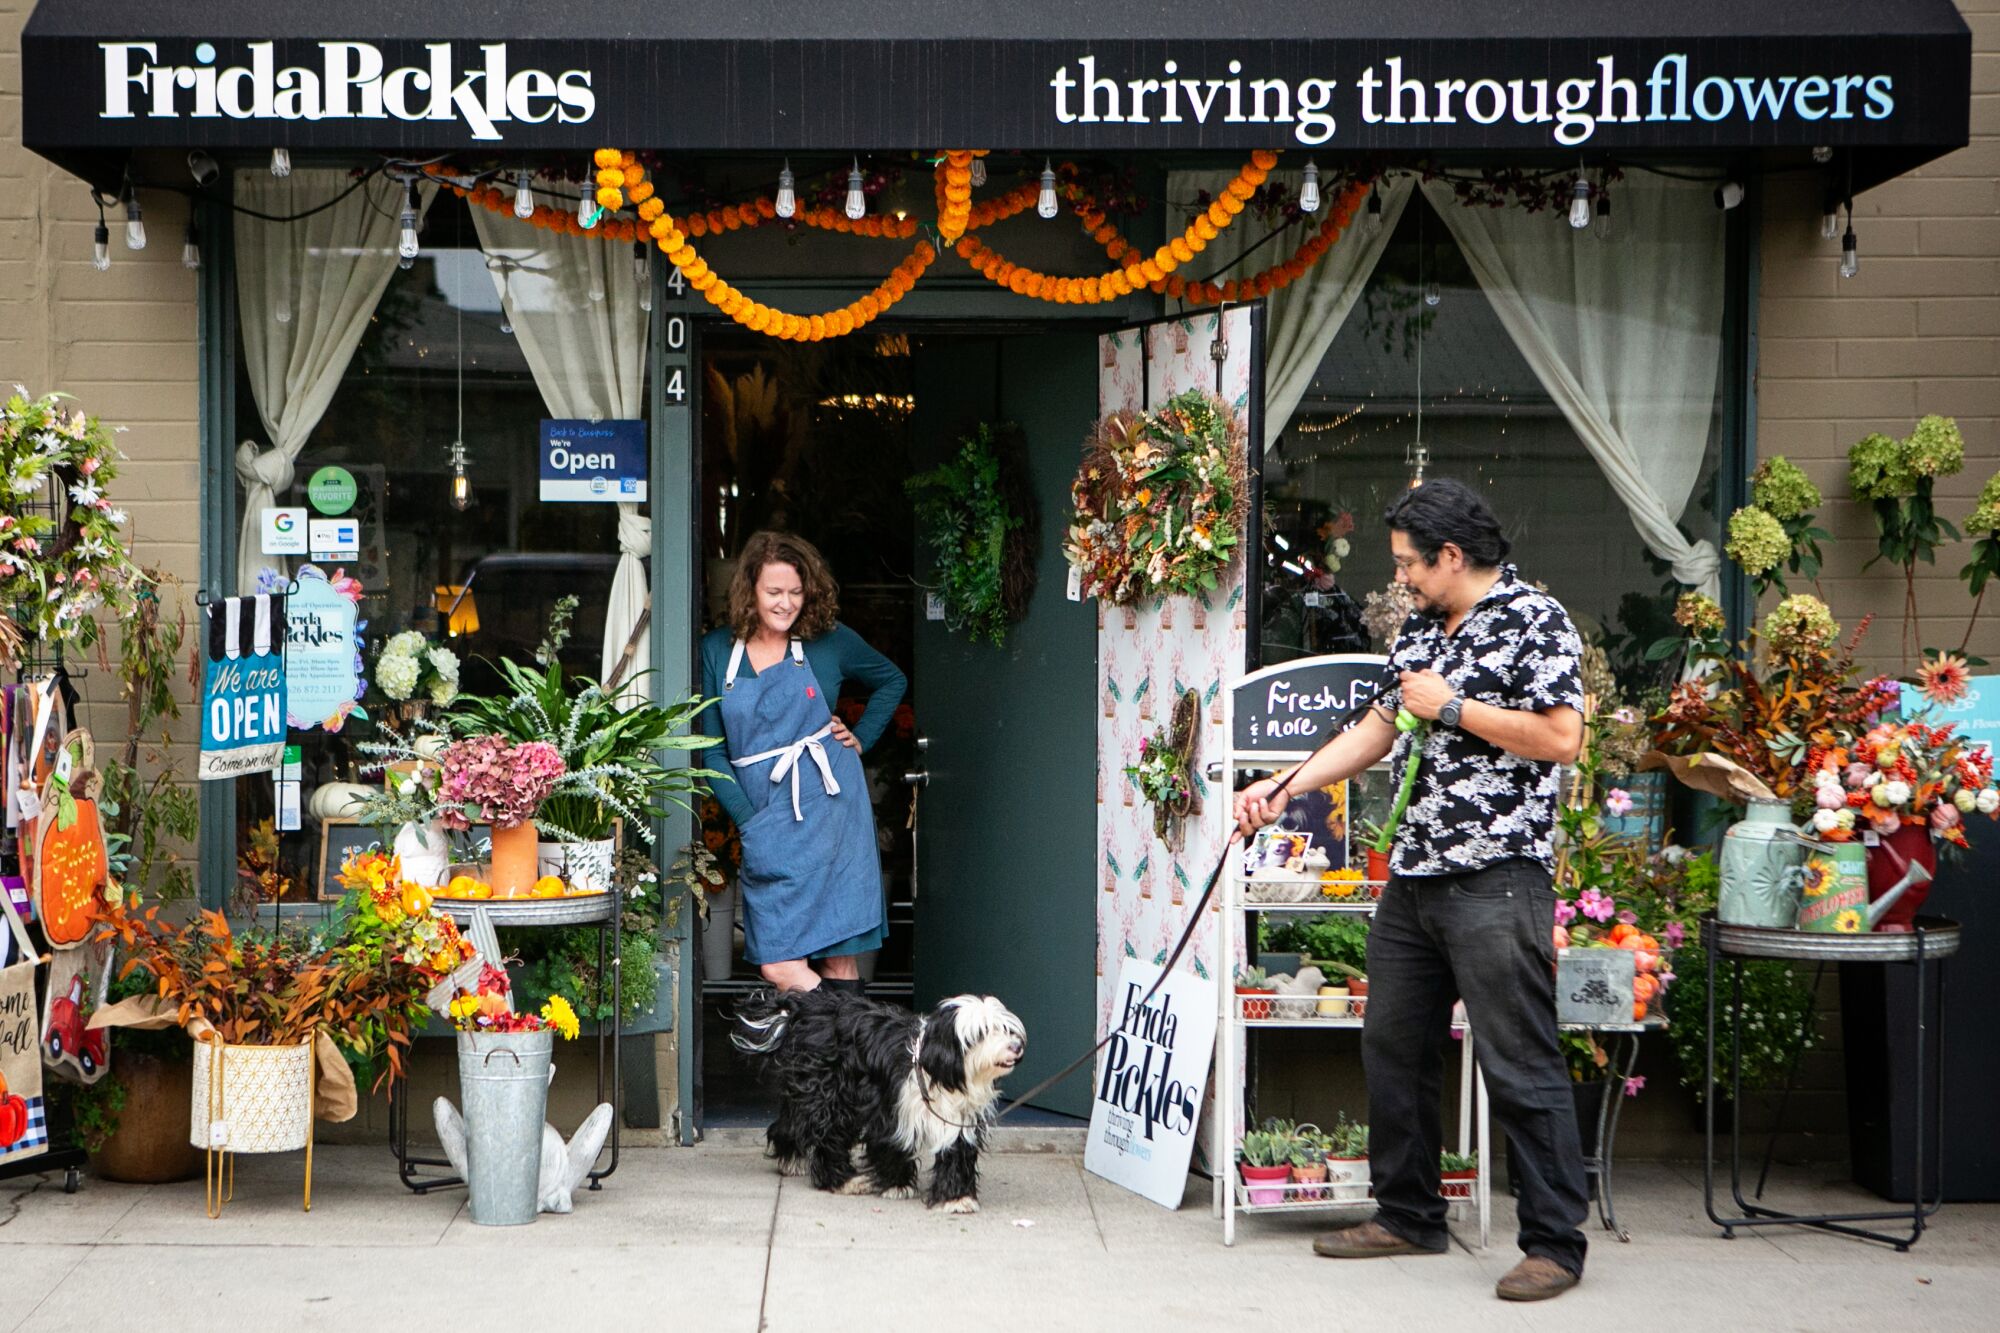 The owners of Frida Pickles stand in front of their colorful shop with their dog.